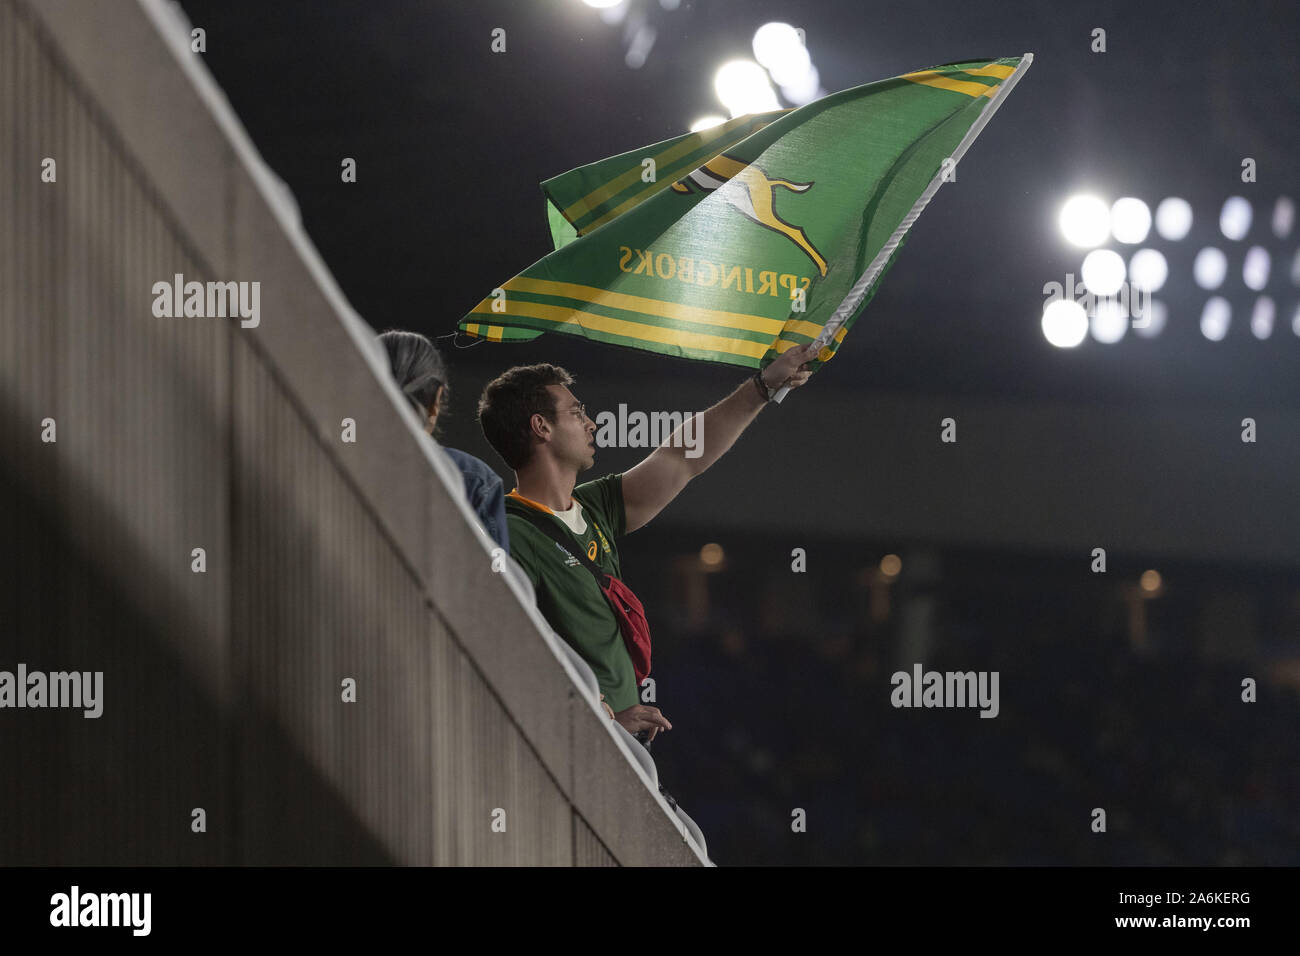 Kanagawa, Japan. 27th Oct, 2019. A man waves a flag of South Africa team, called the Springboks or colloquially the Boks, before starting the Rugby World Cup 2019 Semi-Final 2 between Wales and South Africa at International Stadium Yokohama, near to Tokyo. South Africa defeats Wales 19-16. Credit: Rodrigo Reyes Marin/ZUMA Wire/Alamy Live News Stock Photo